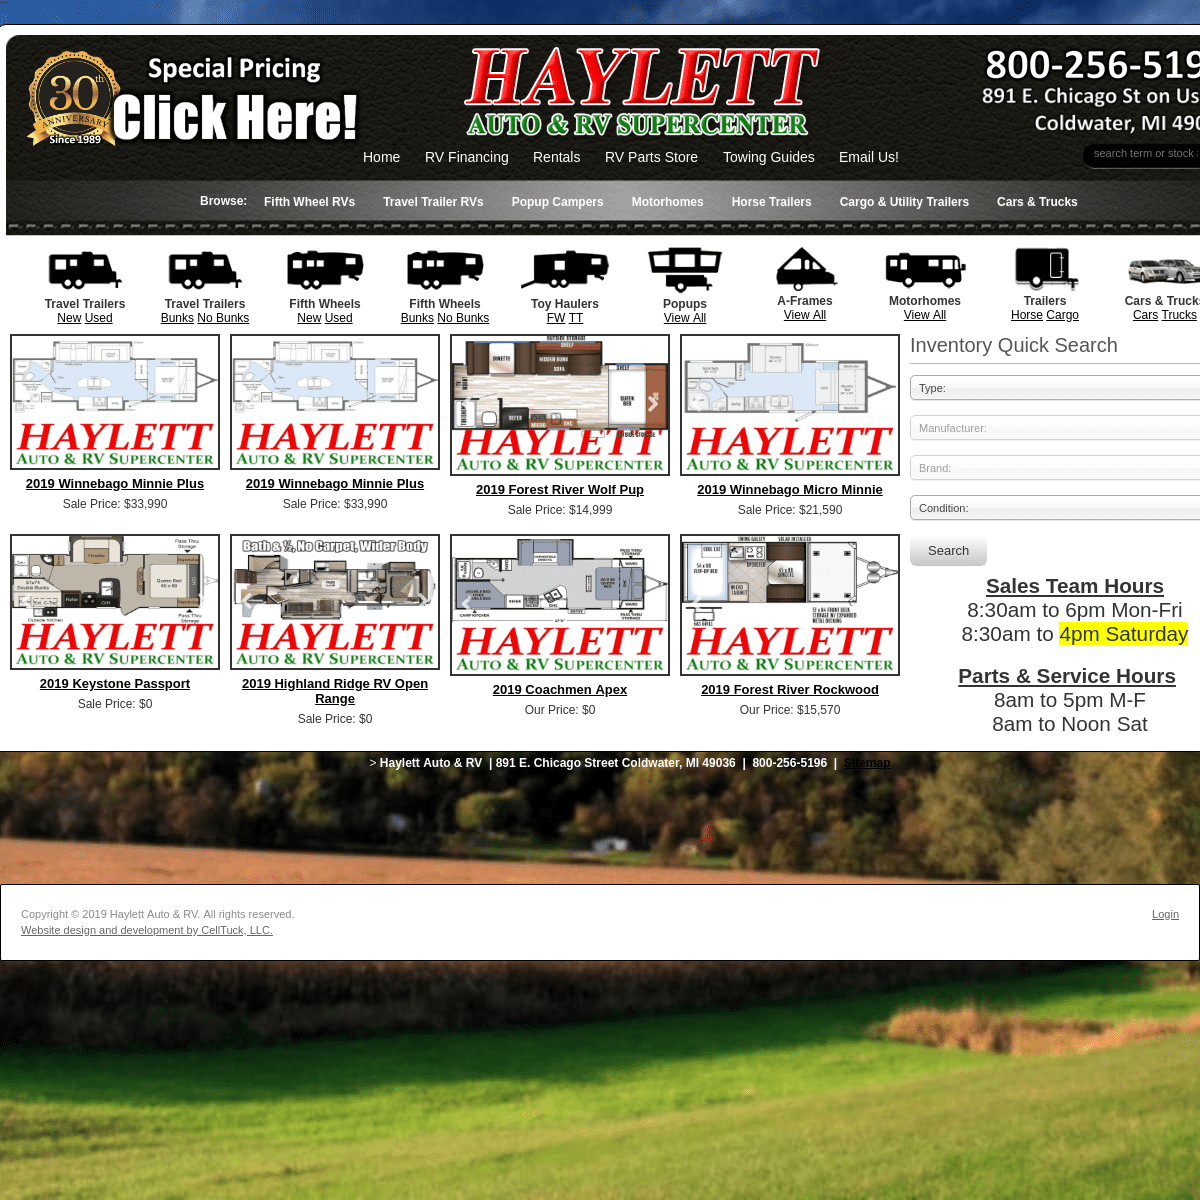 A complete backup of haylettautoandrv.com